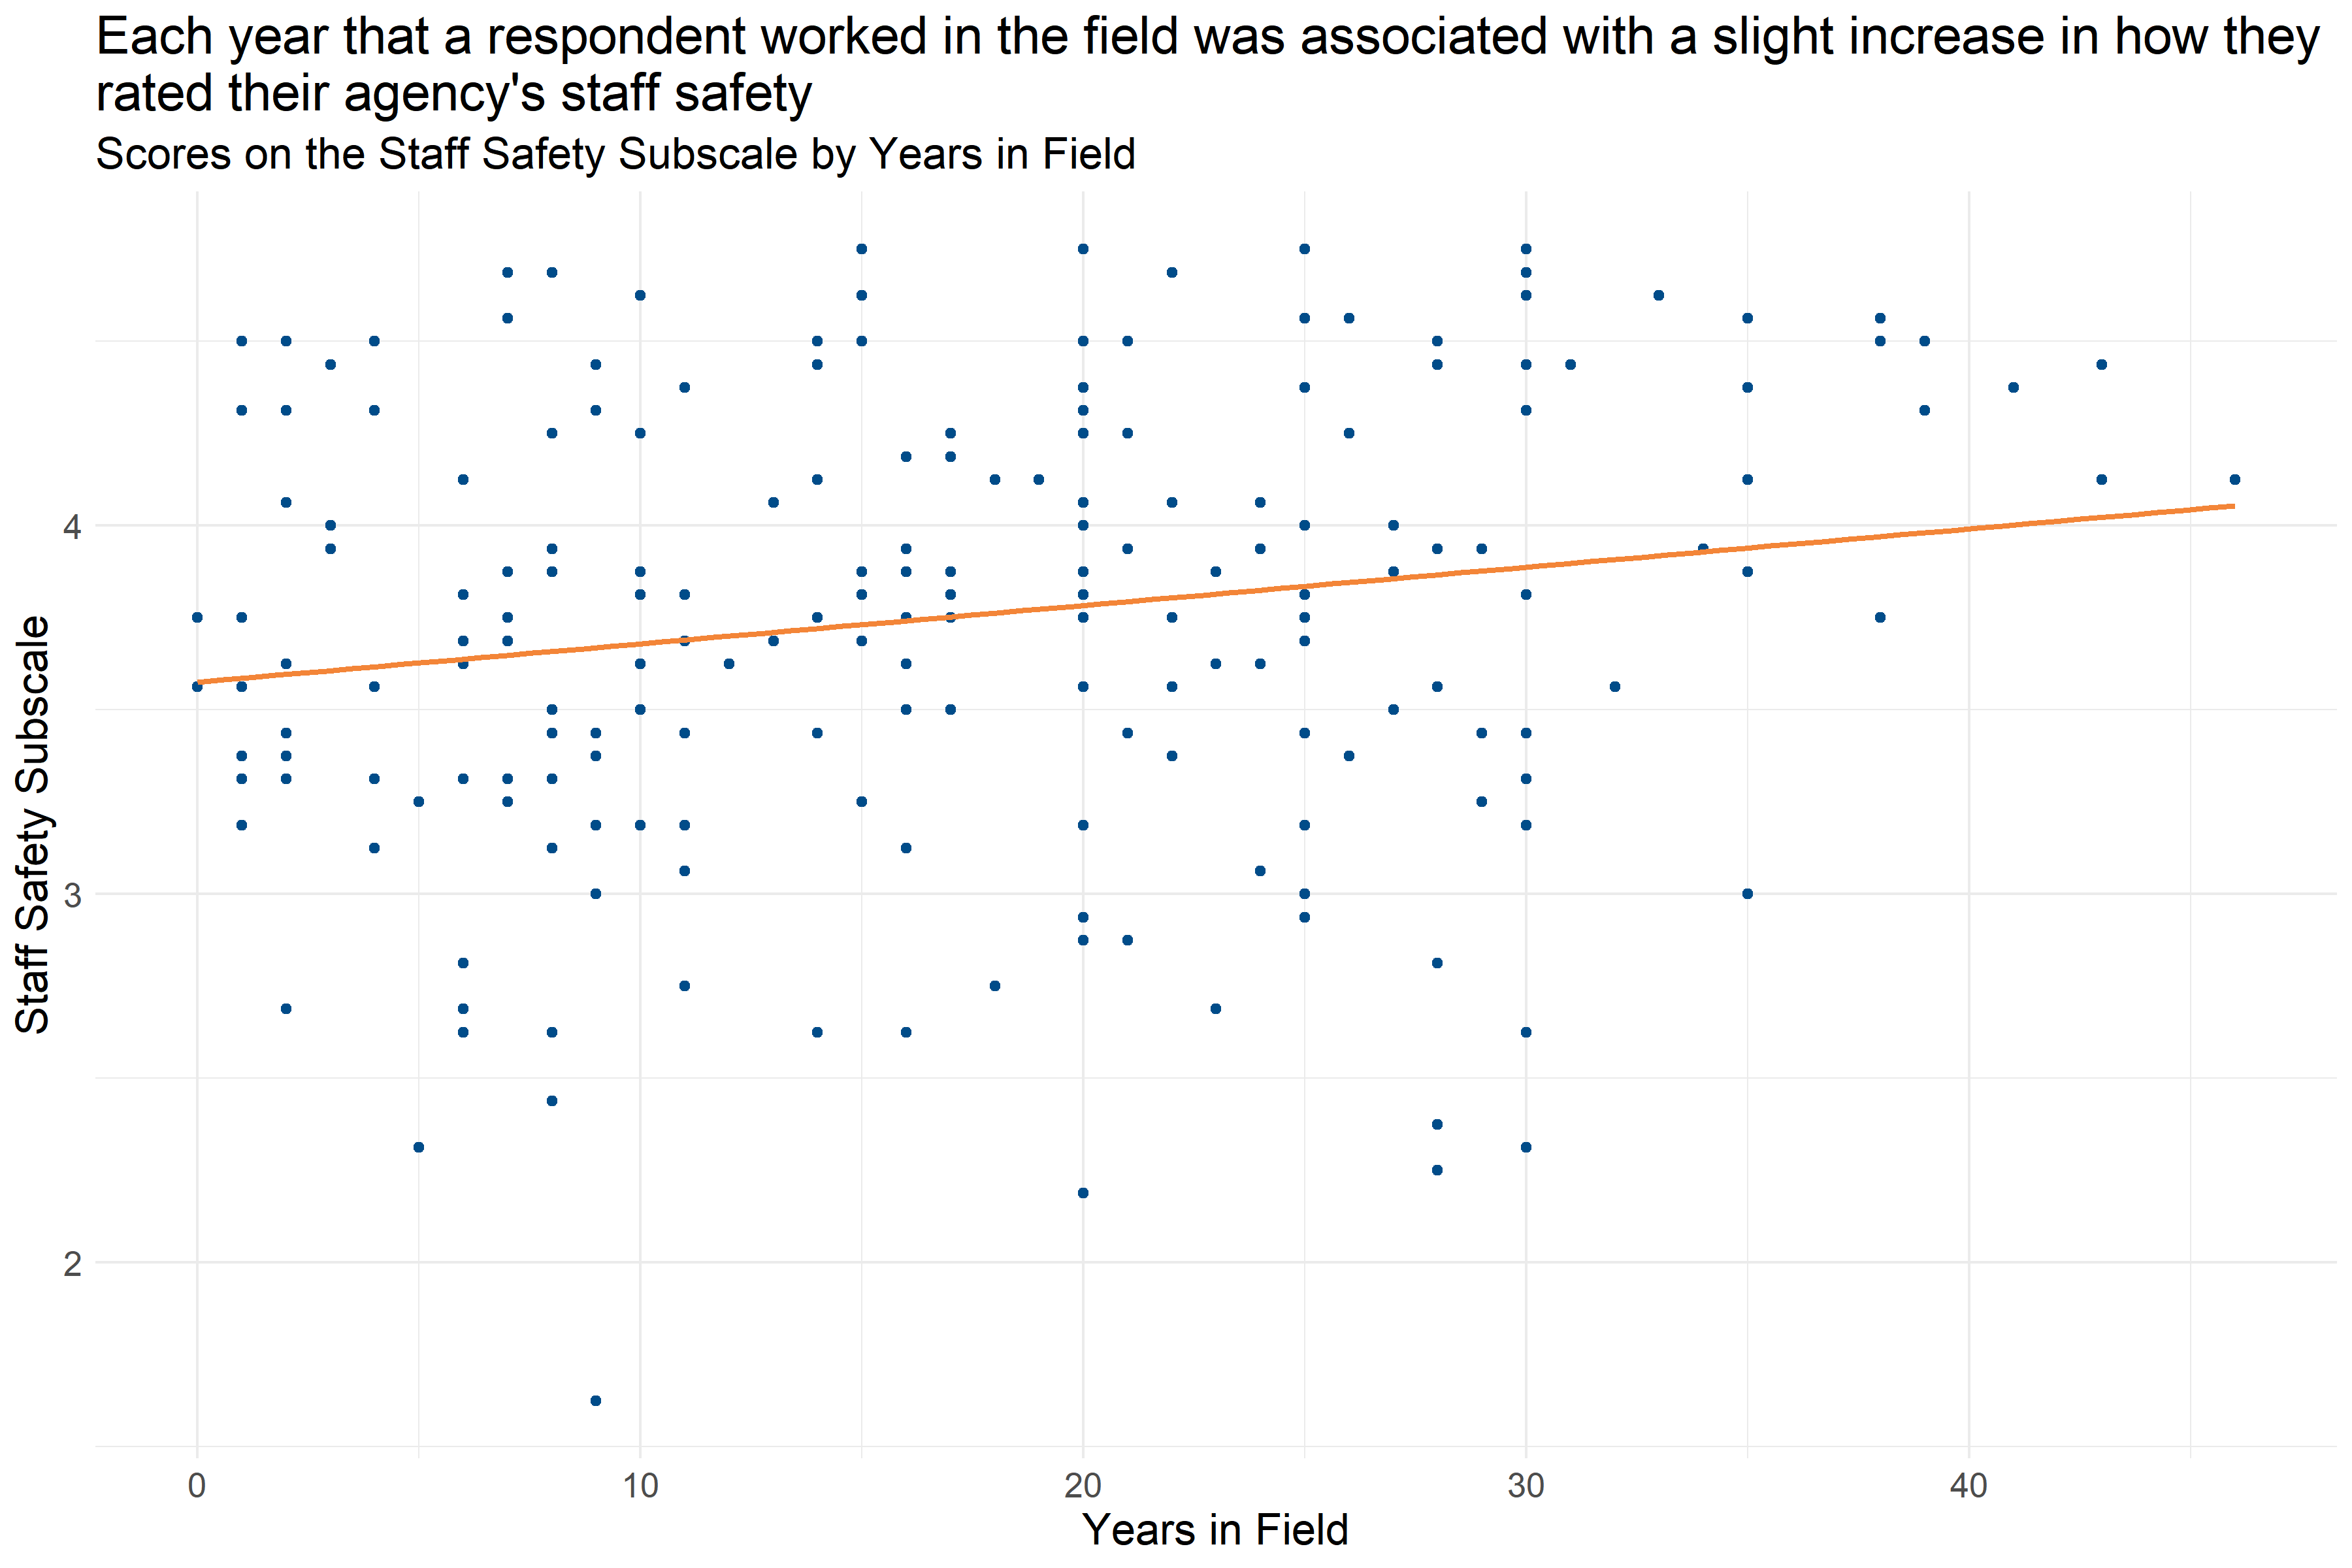 Scatter plot of Years in Field and Staff Safety Subscale score